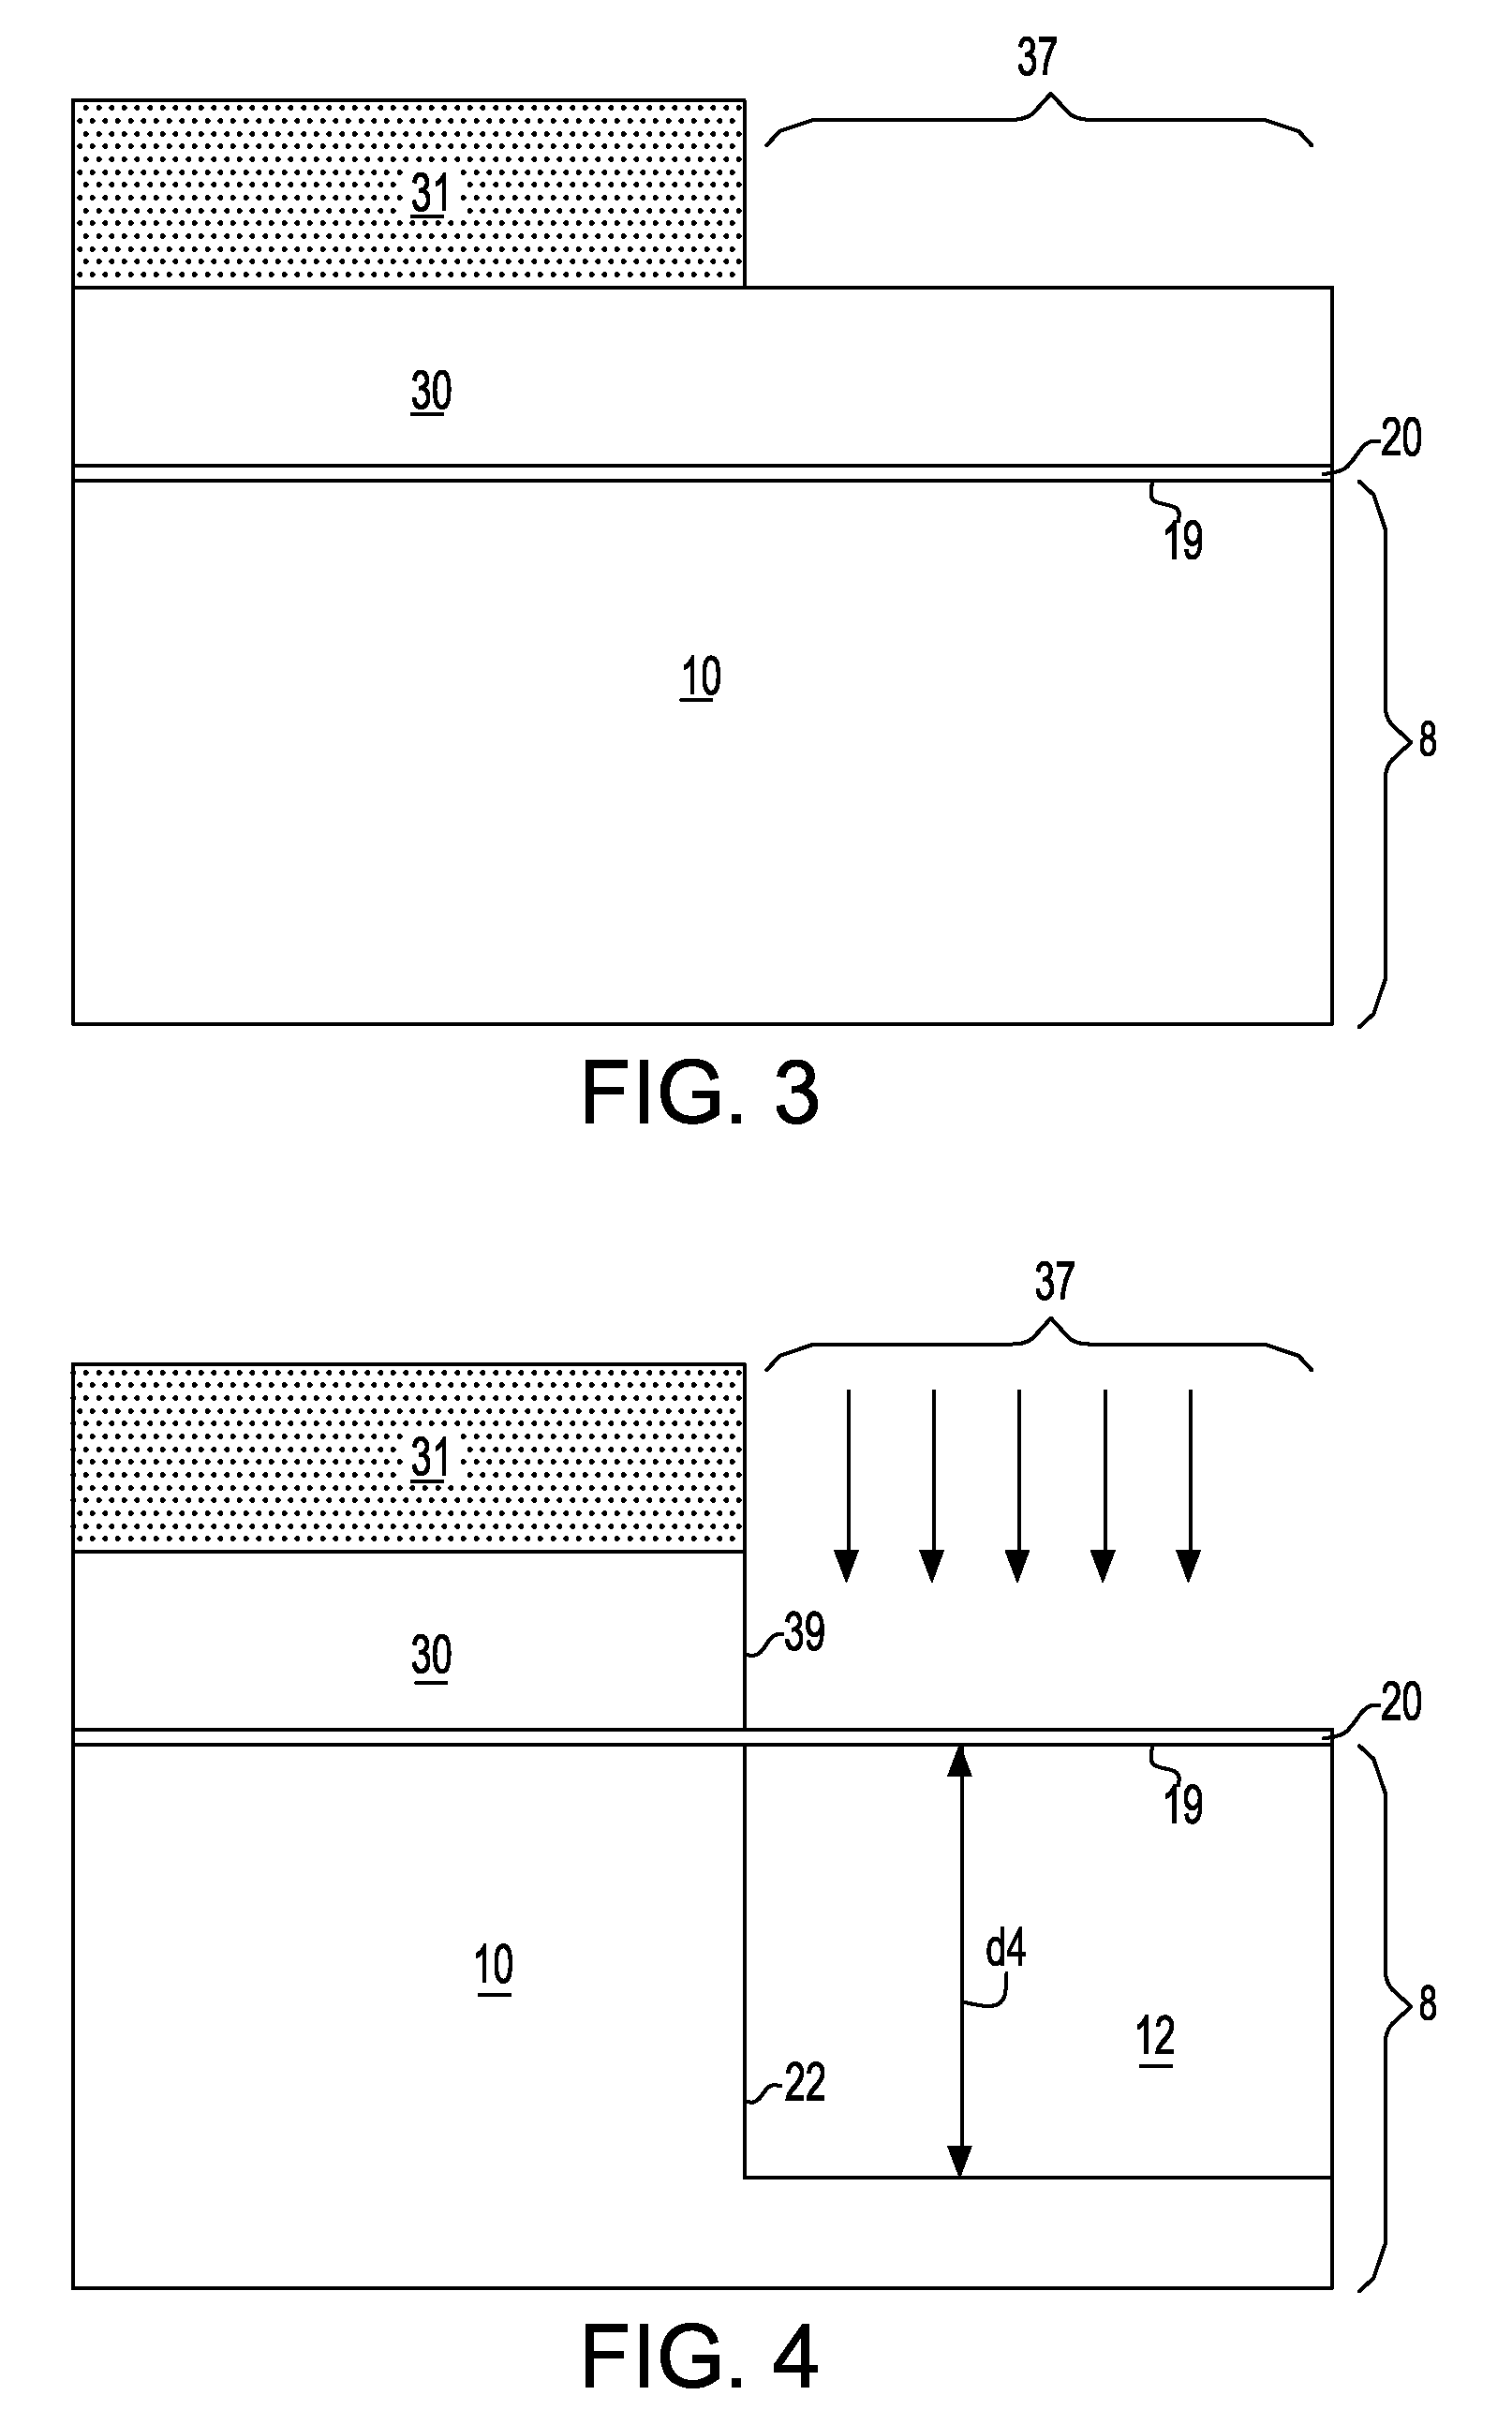 Self-aligned and extended inter-well isolation structure